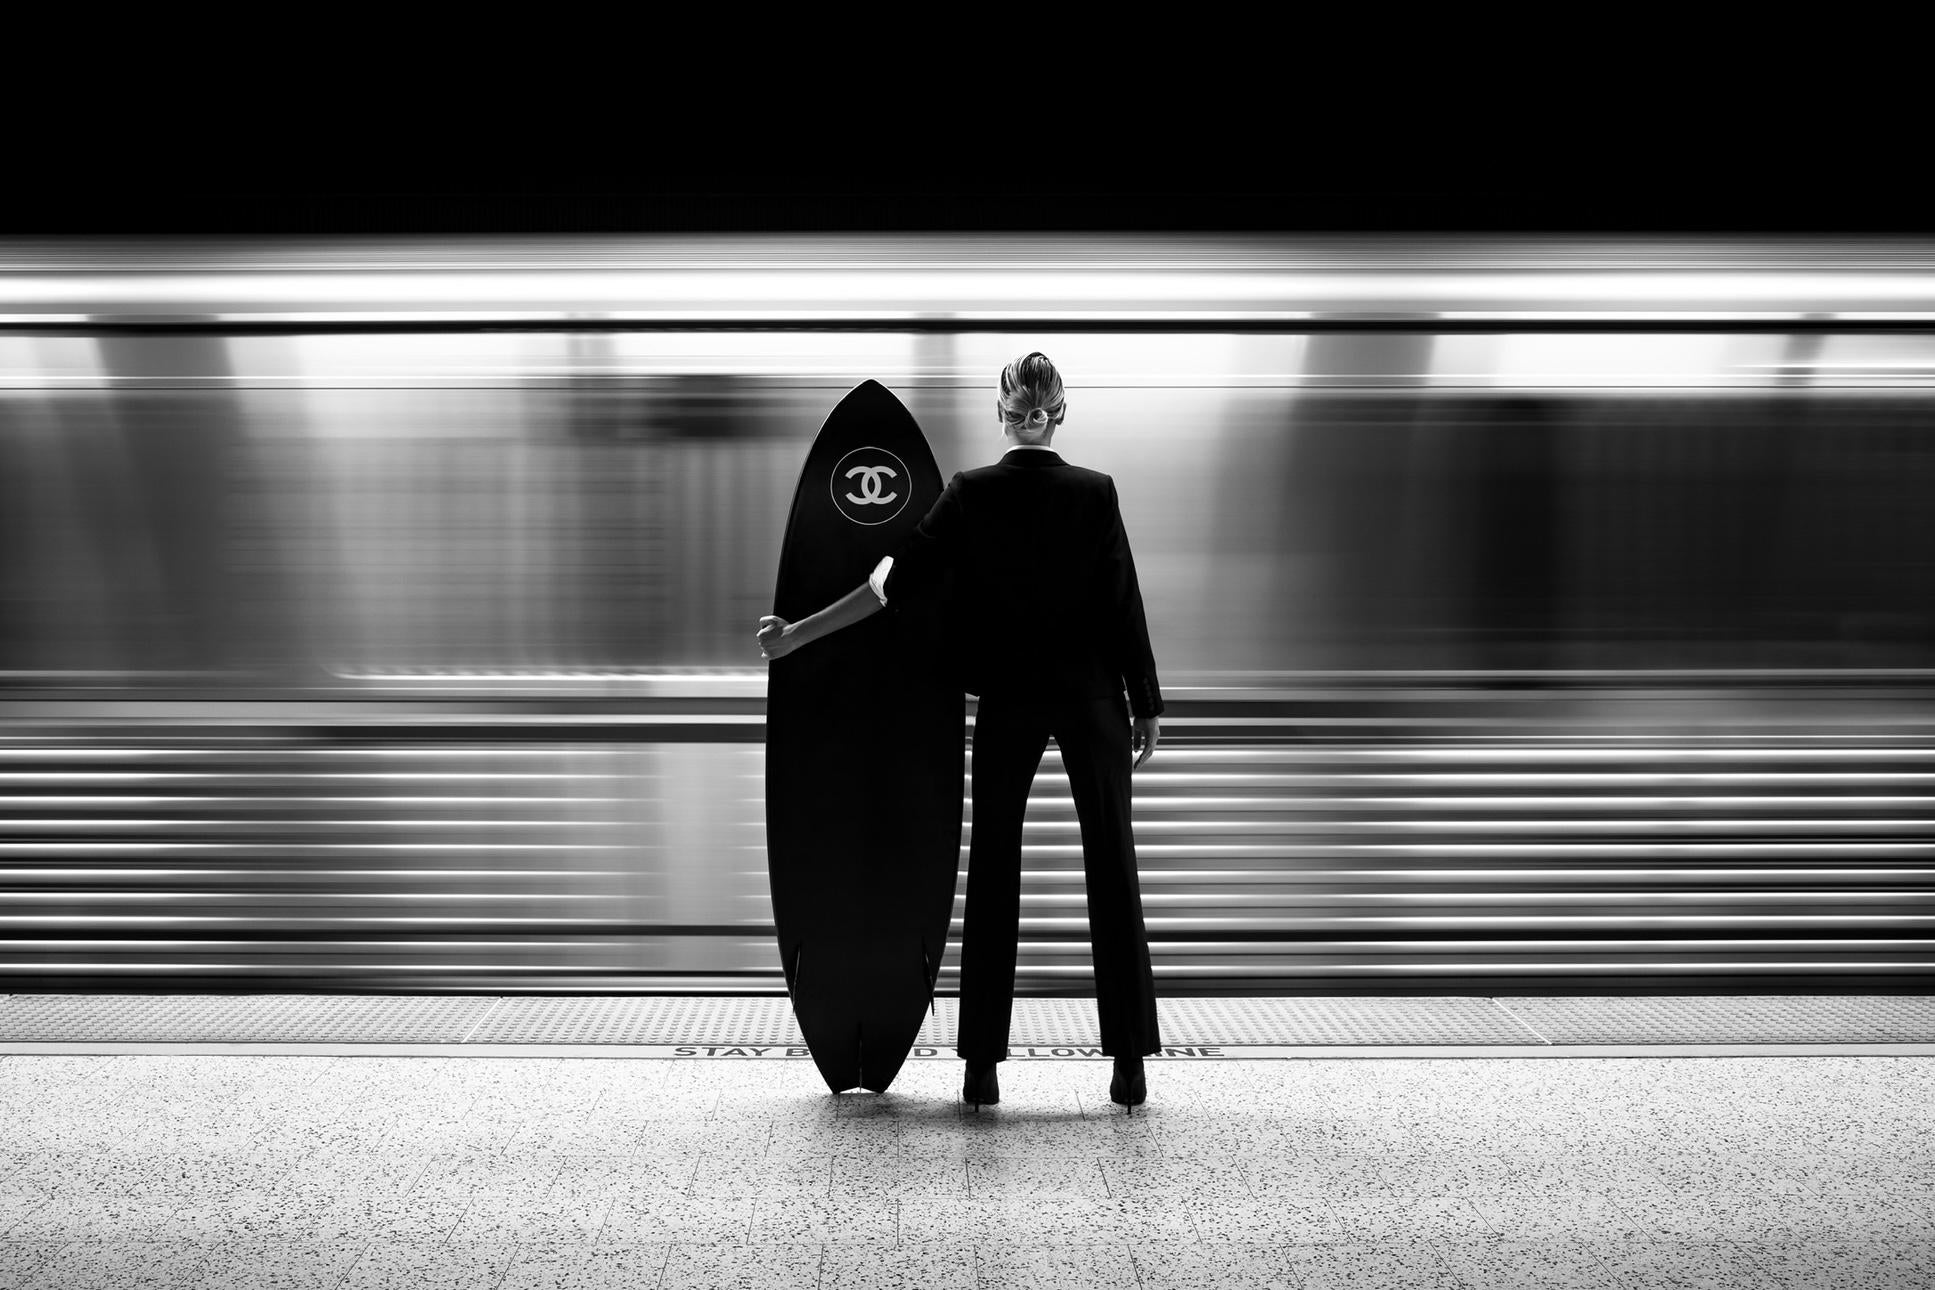 "Subway Surfer" Photography 16" x 42" inch Edition of 15 by Brendan North